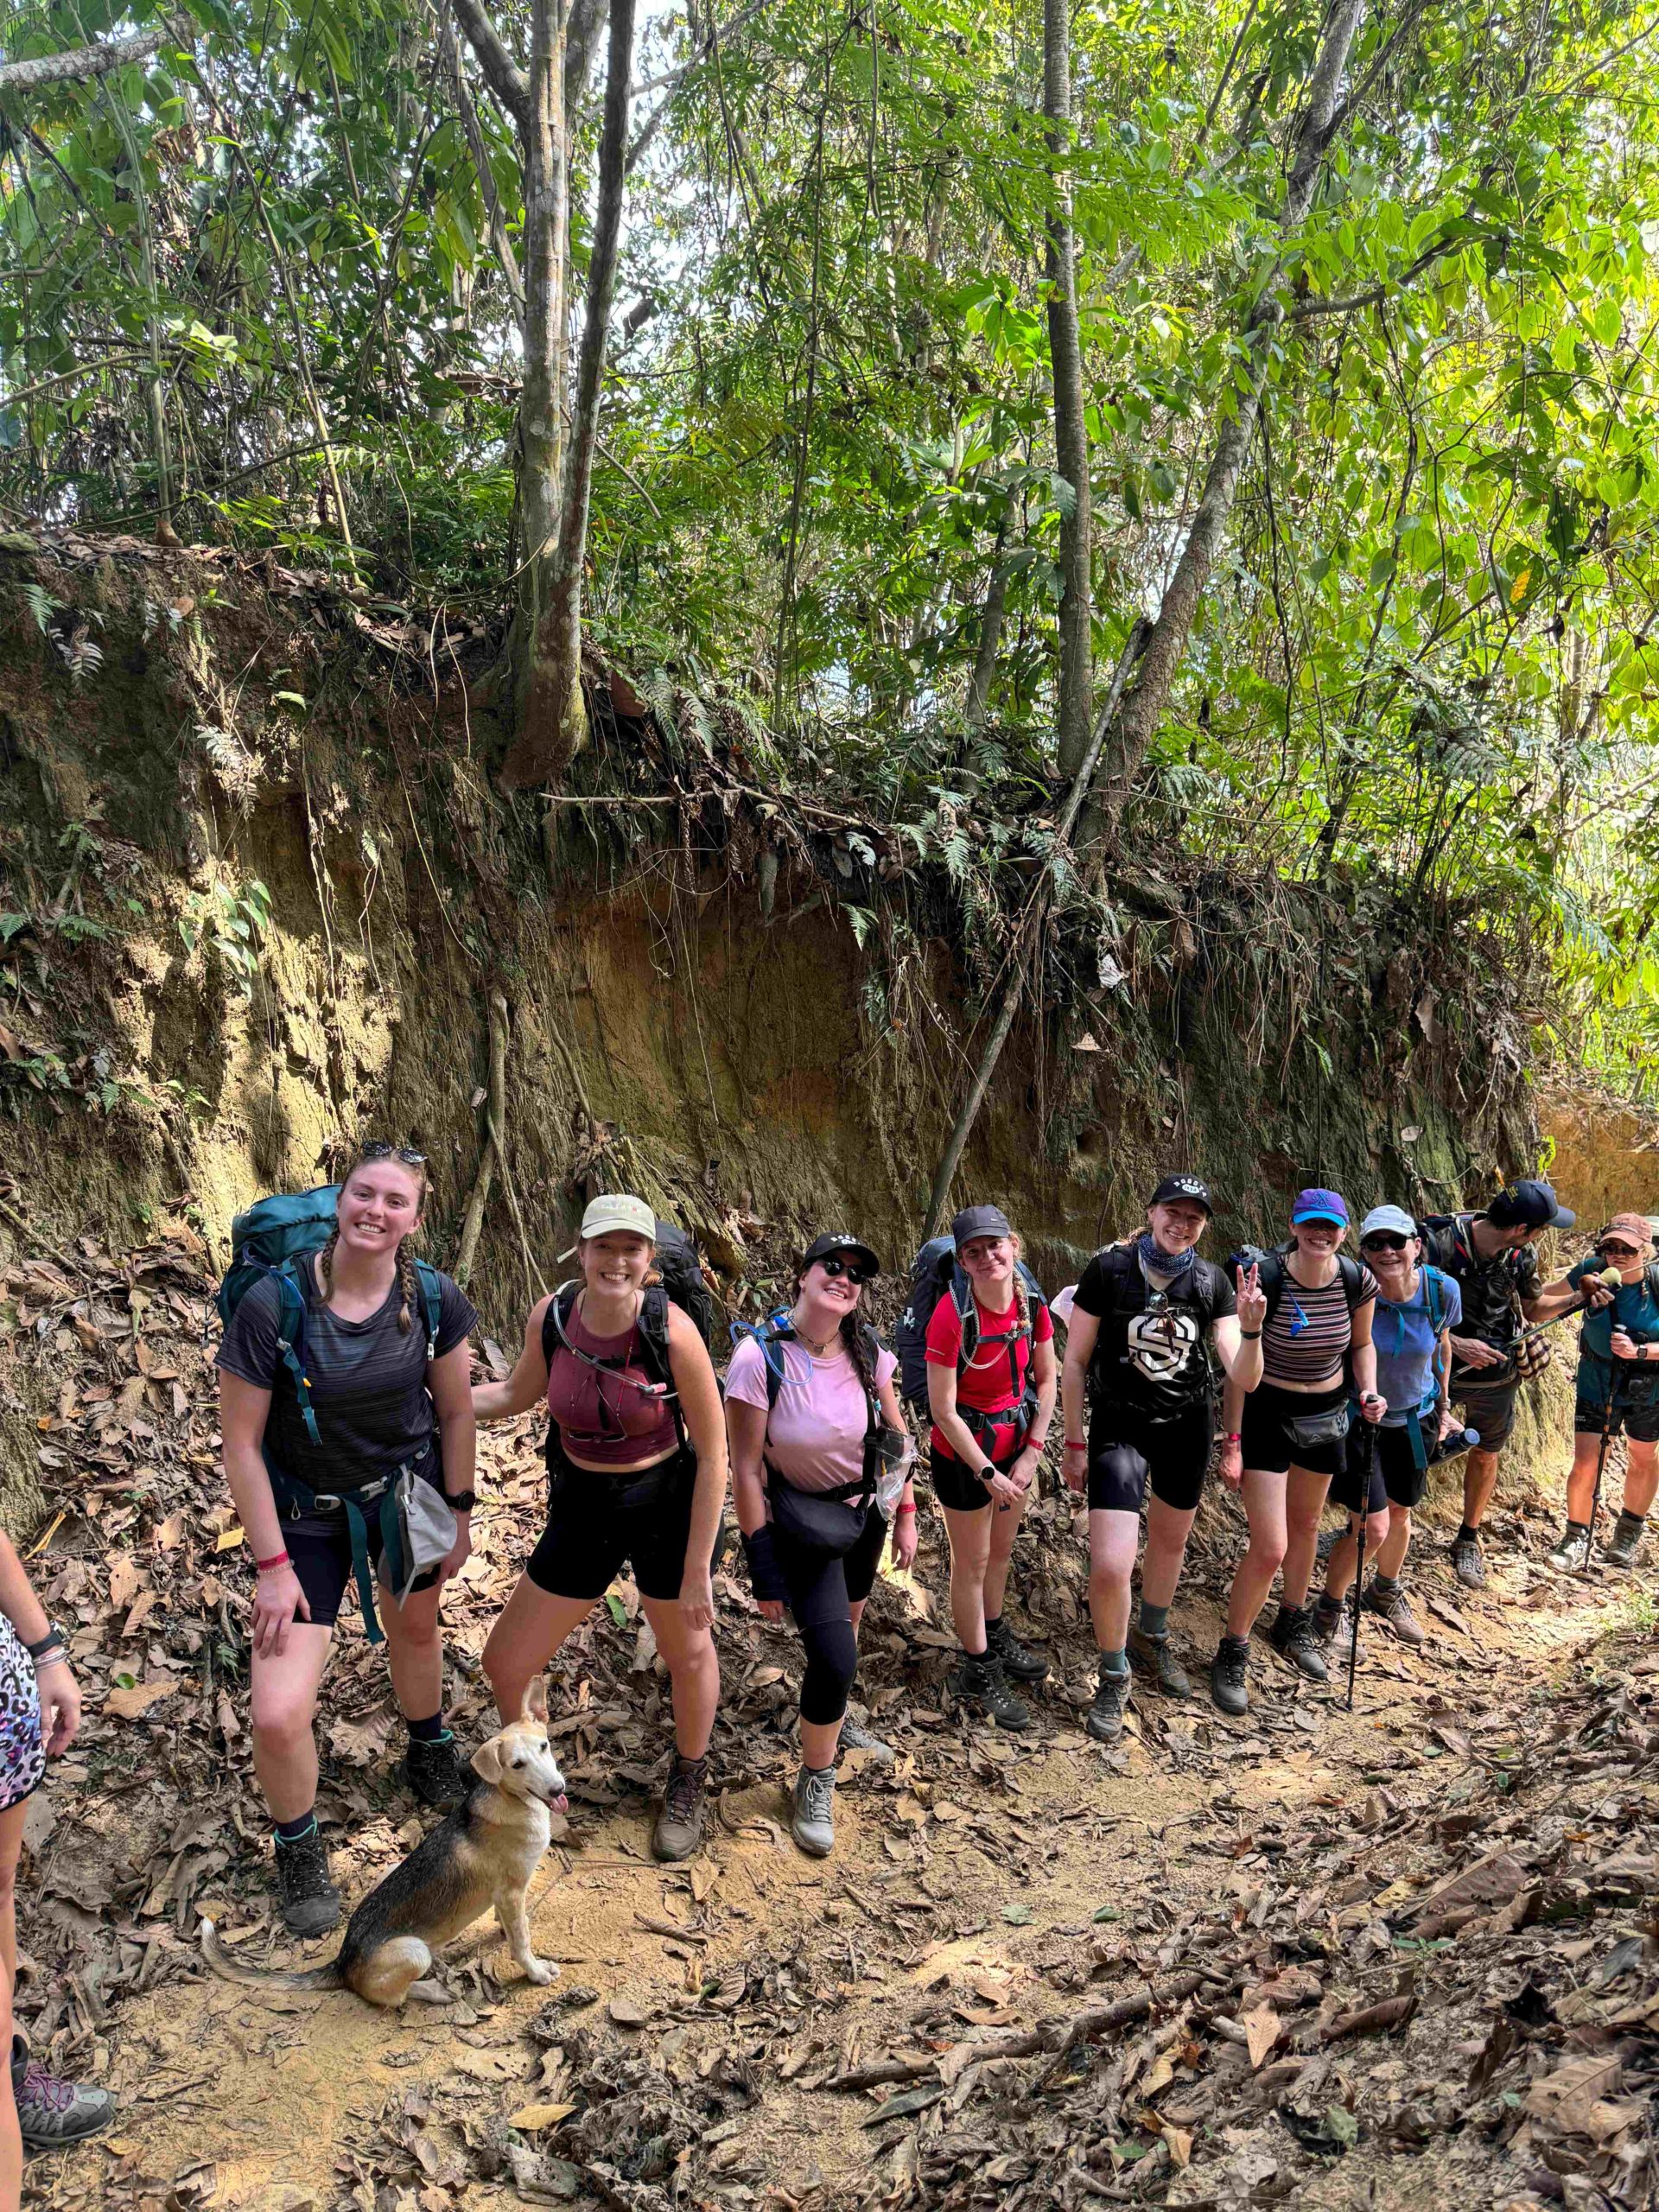 A group of guests on the Lost City Trek in Colombia